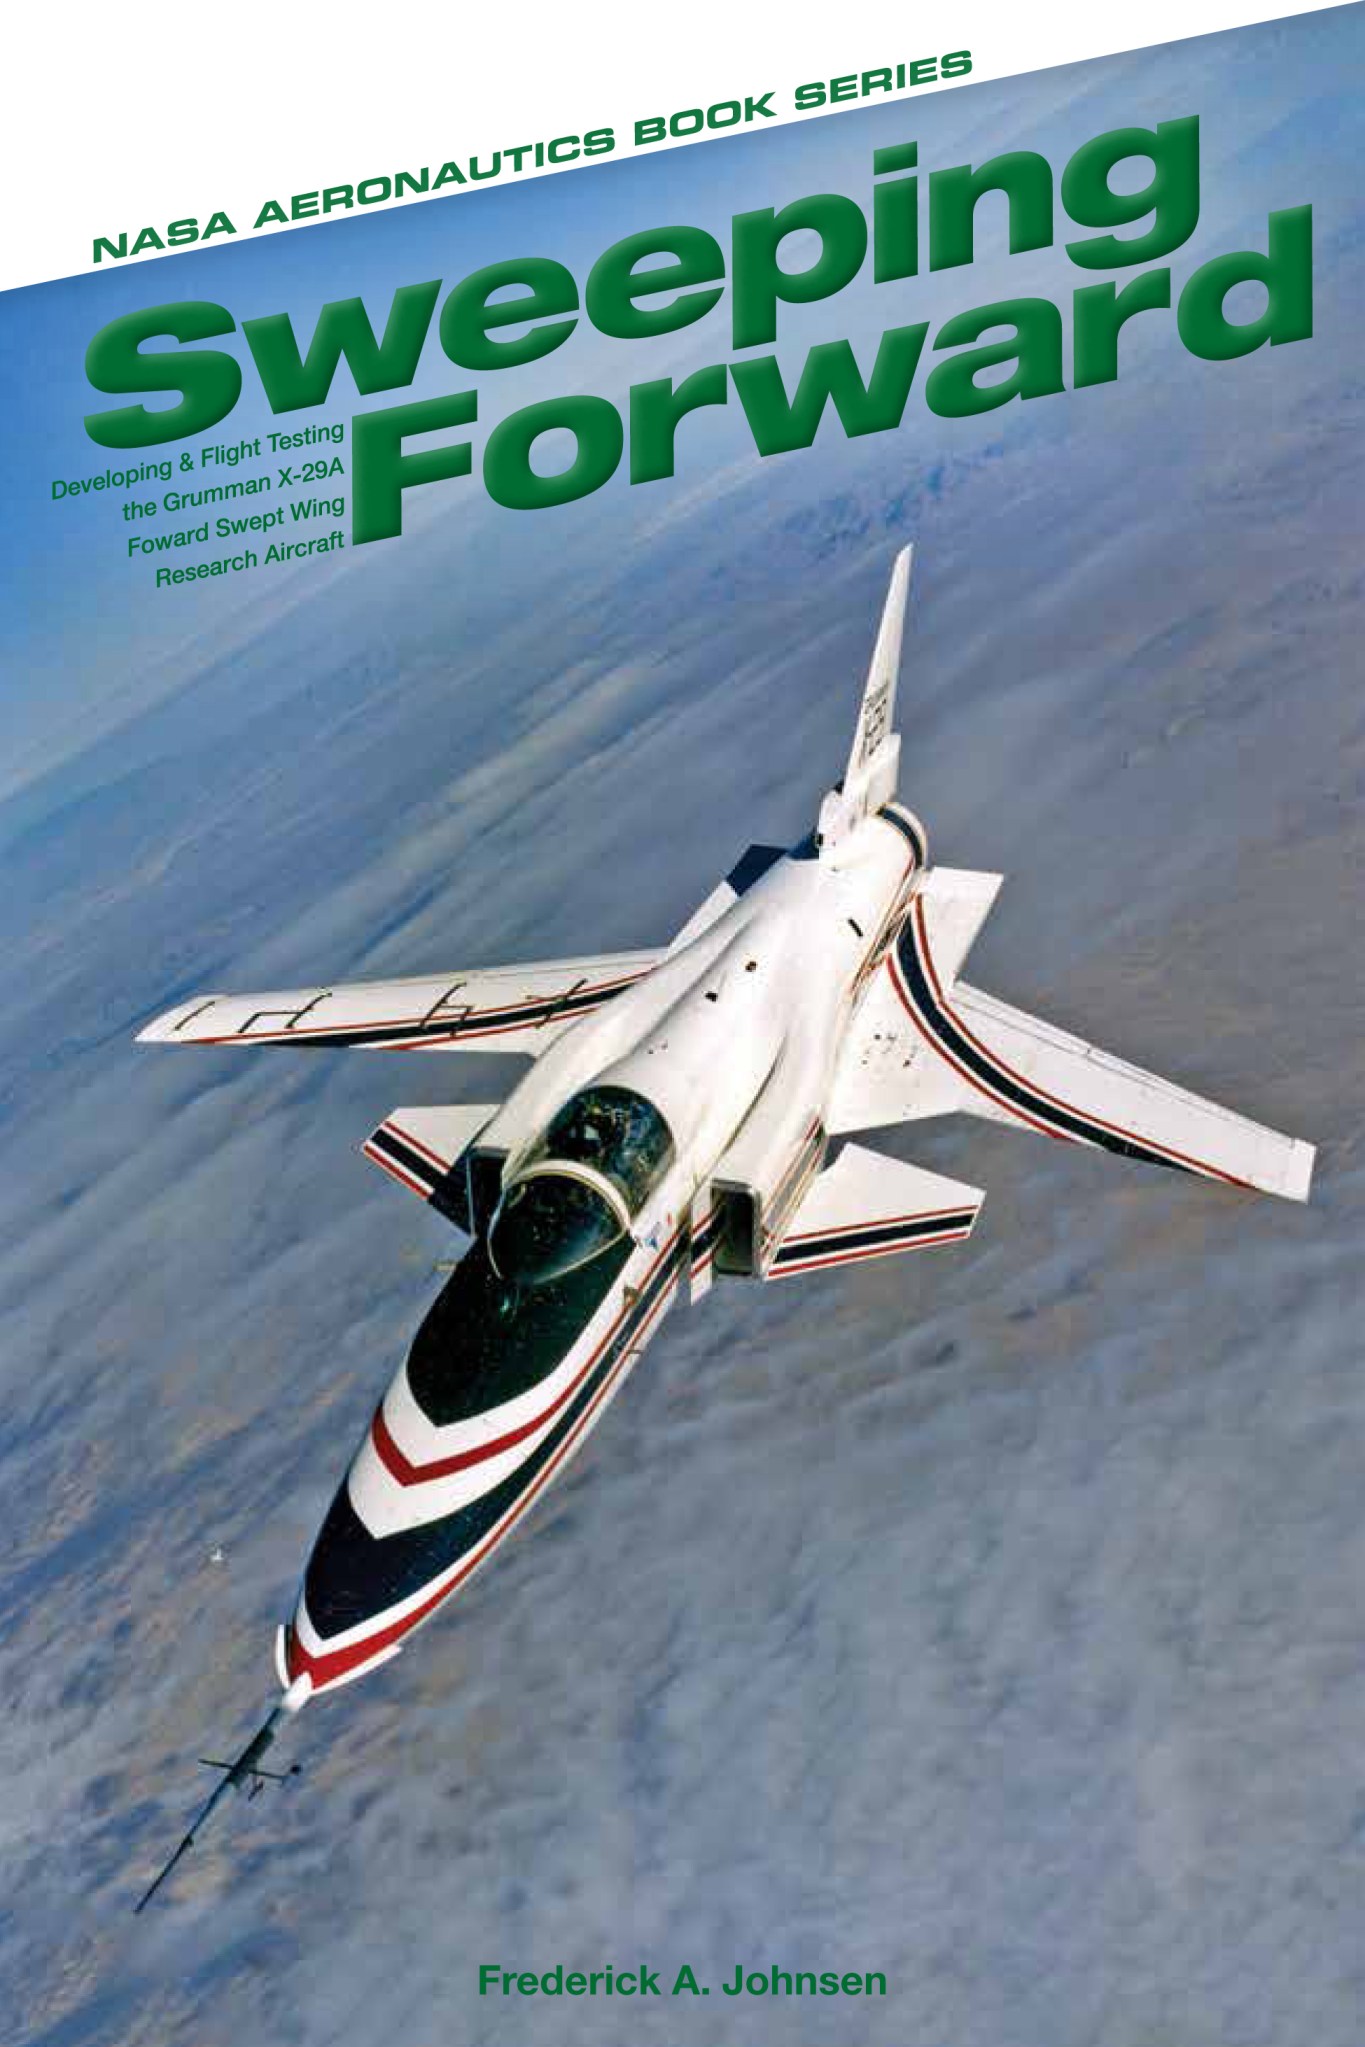 Sweeping Forward book cover, showing the X-29 in flight.